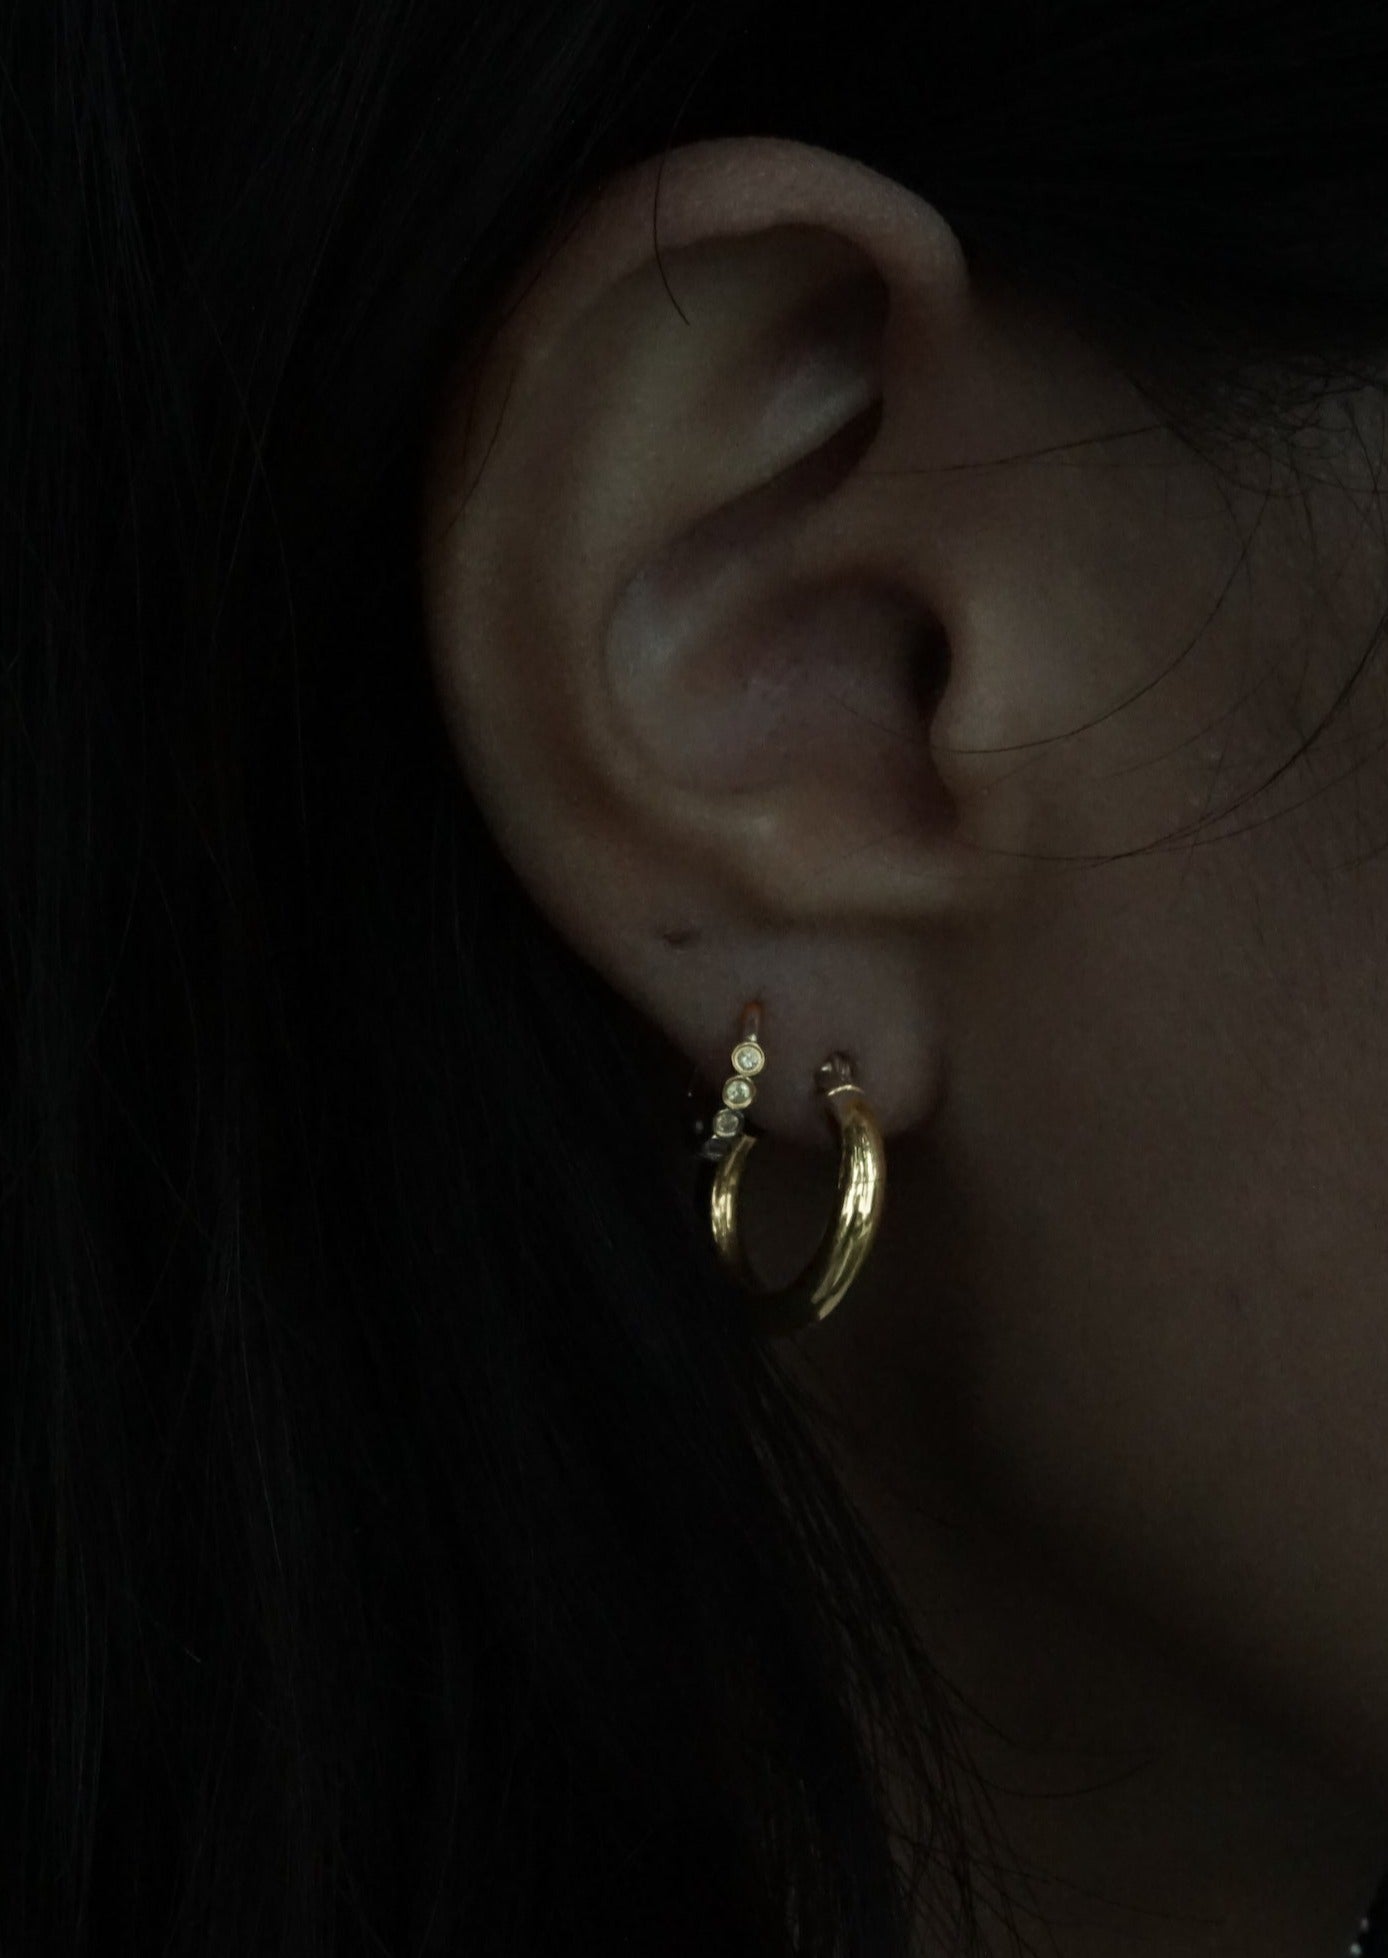 10k Gold Small Hoops